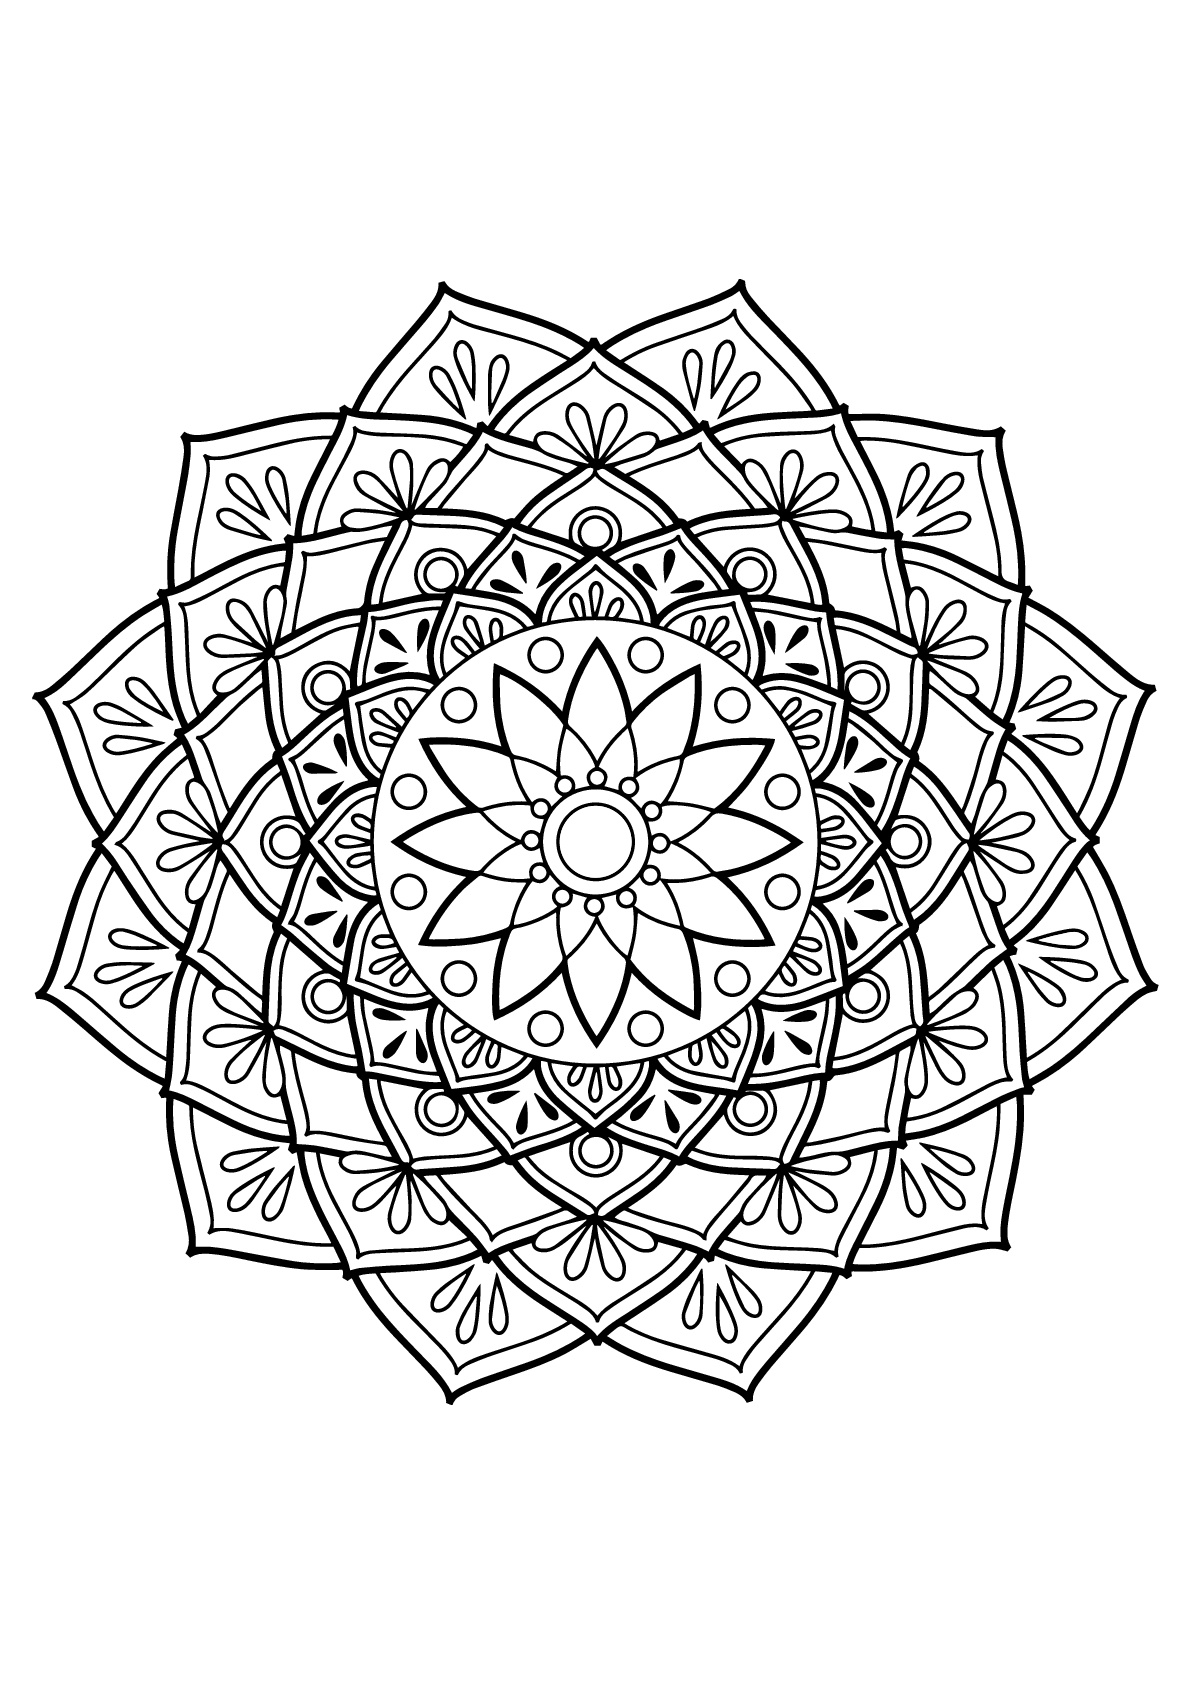 Download Mandala from free coloring books for adults 19 - Mandalas Adult Coloring Pages